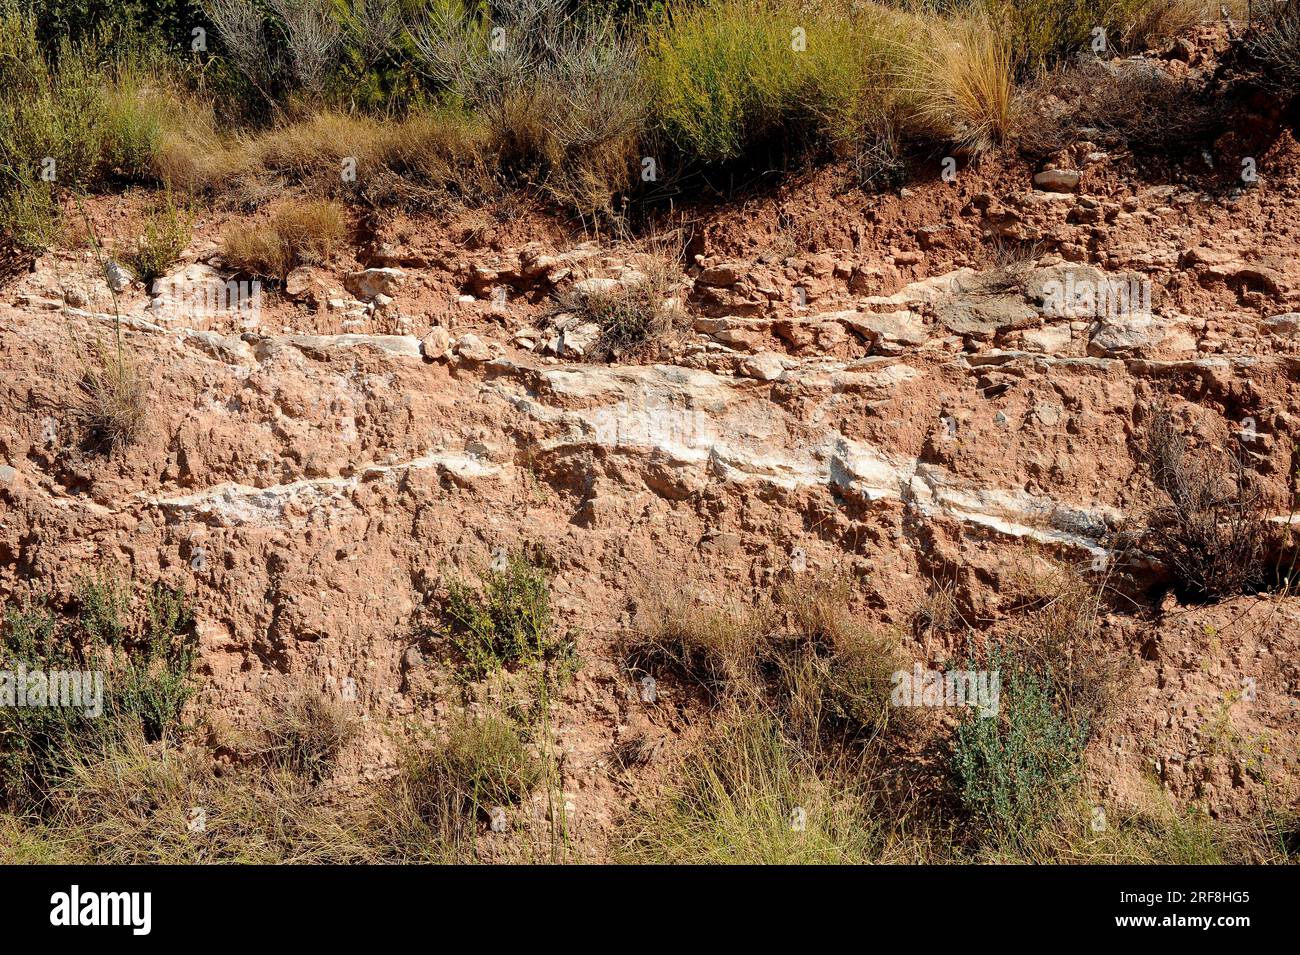 Caliche, calcrete, duricrust or hardpan is a calcium carbonate cement that precipitates between others soil materials. This photo was taken near Torto Stock Photo